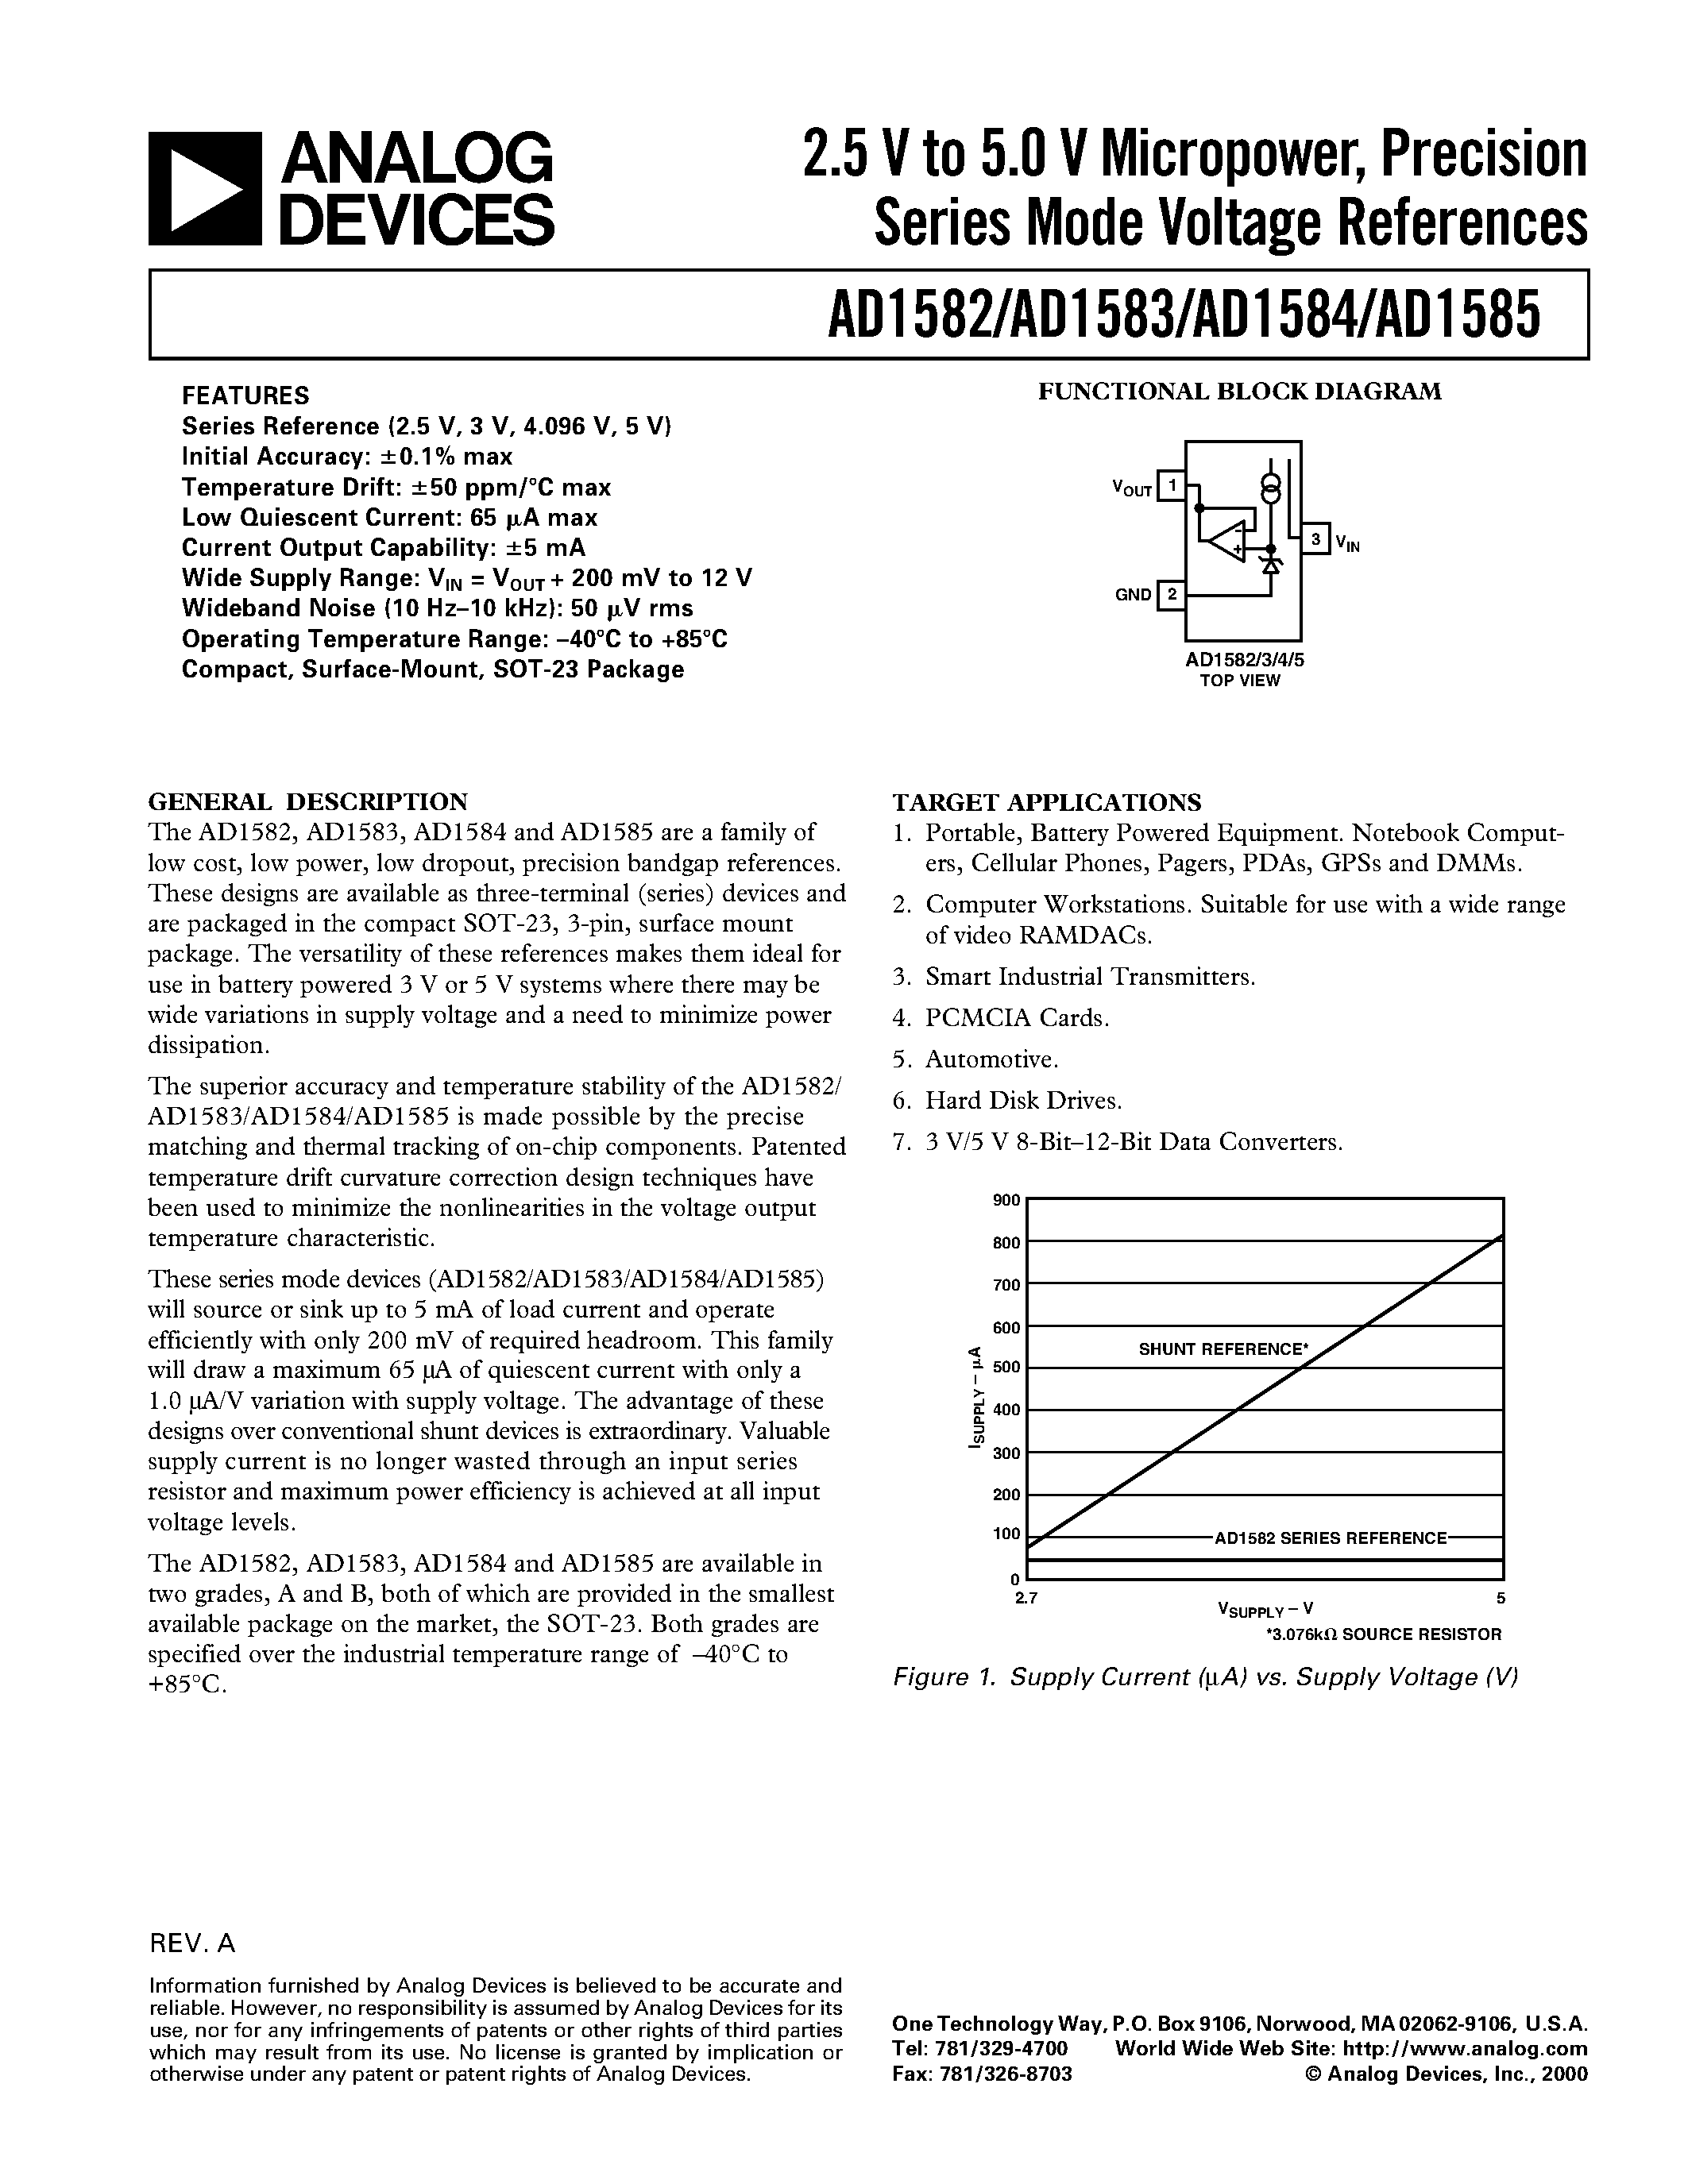 Datasheet AD1582 - 2.5 V to 5.0 V Micropower/ Precision Series Mode Voltage References page 1